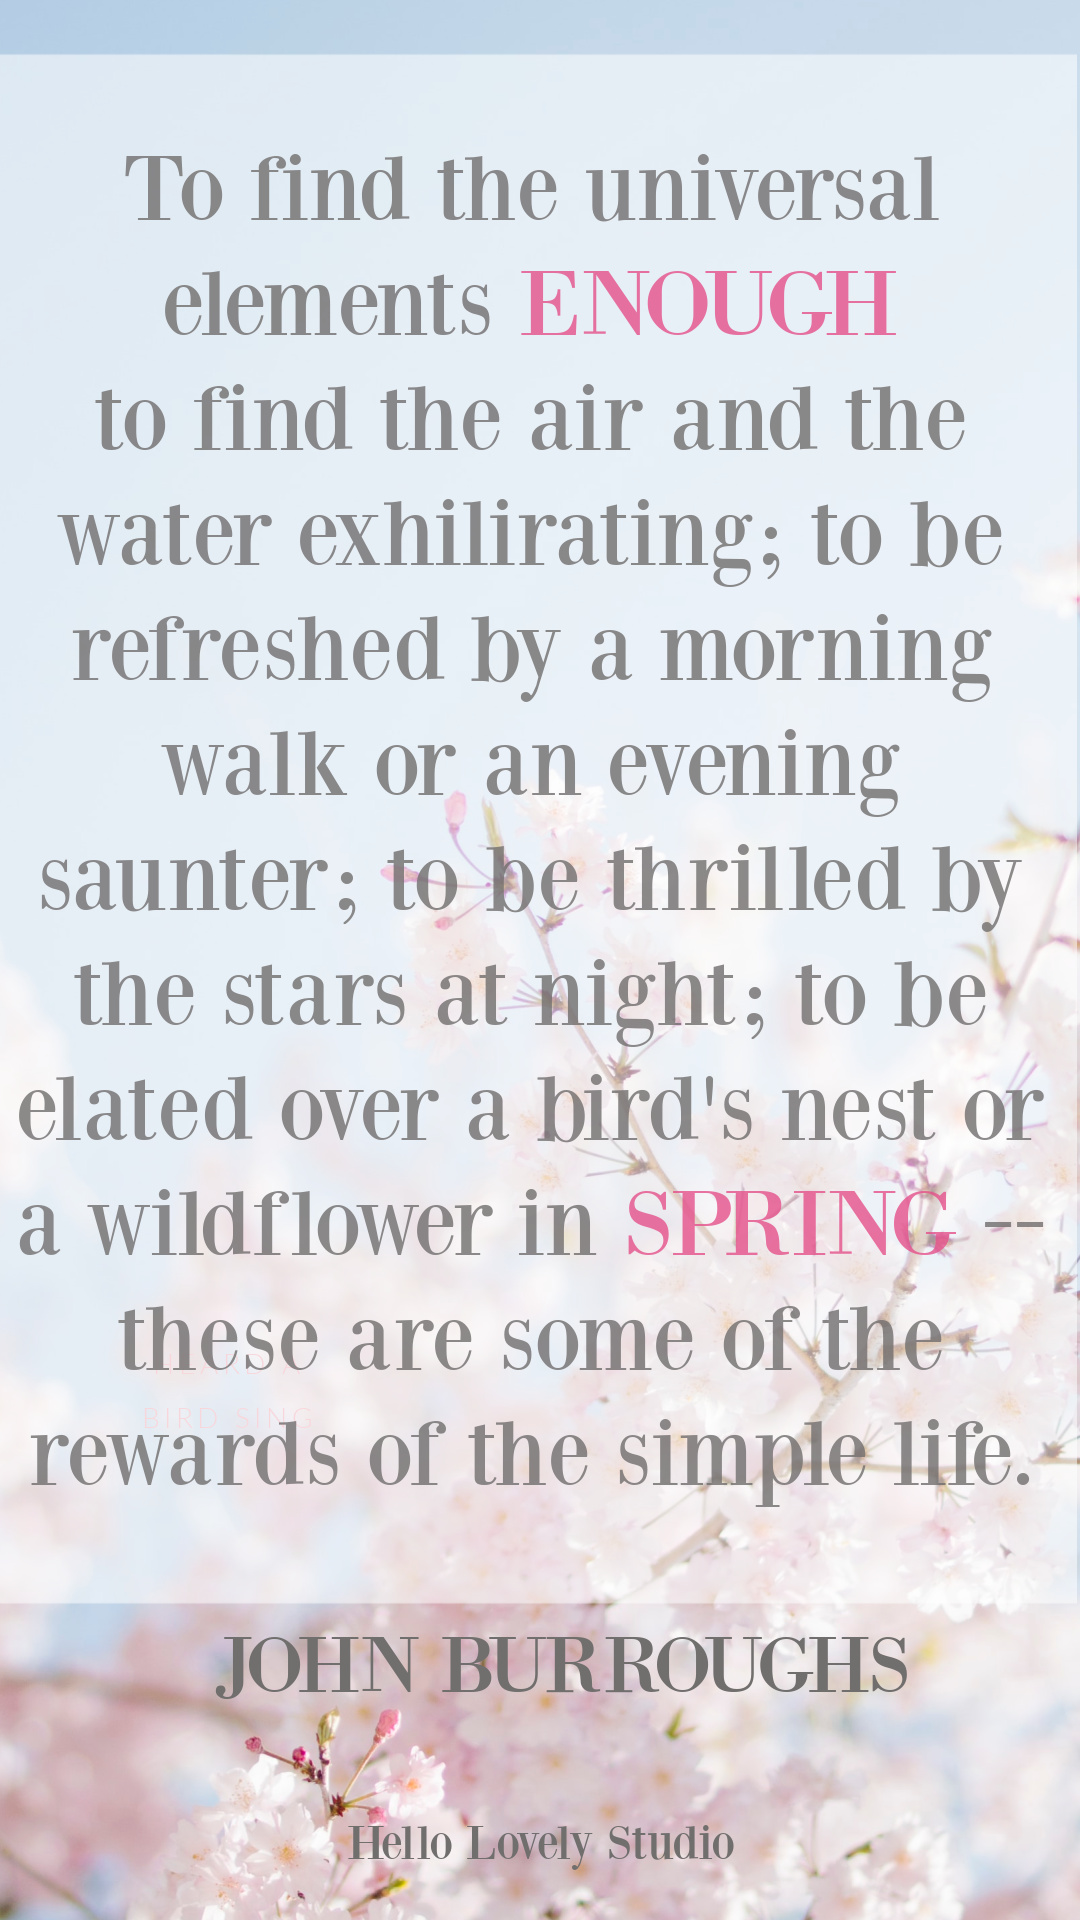 Spring quotes inspirational to welcome hope and encourage wholeness - Hello Lovely Studio. #springquotes #johnburroughs